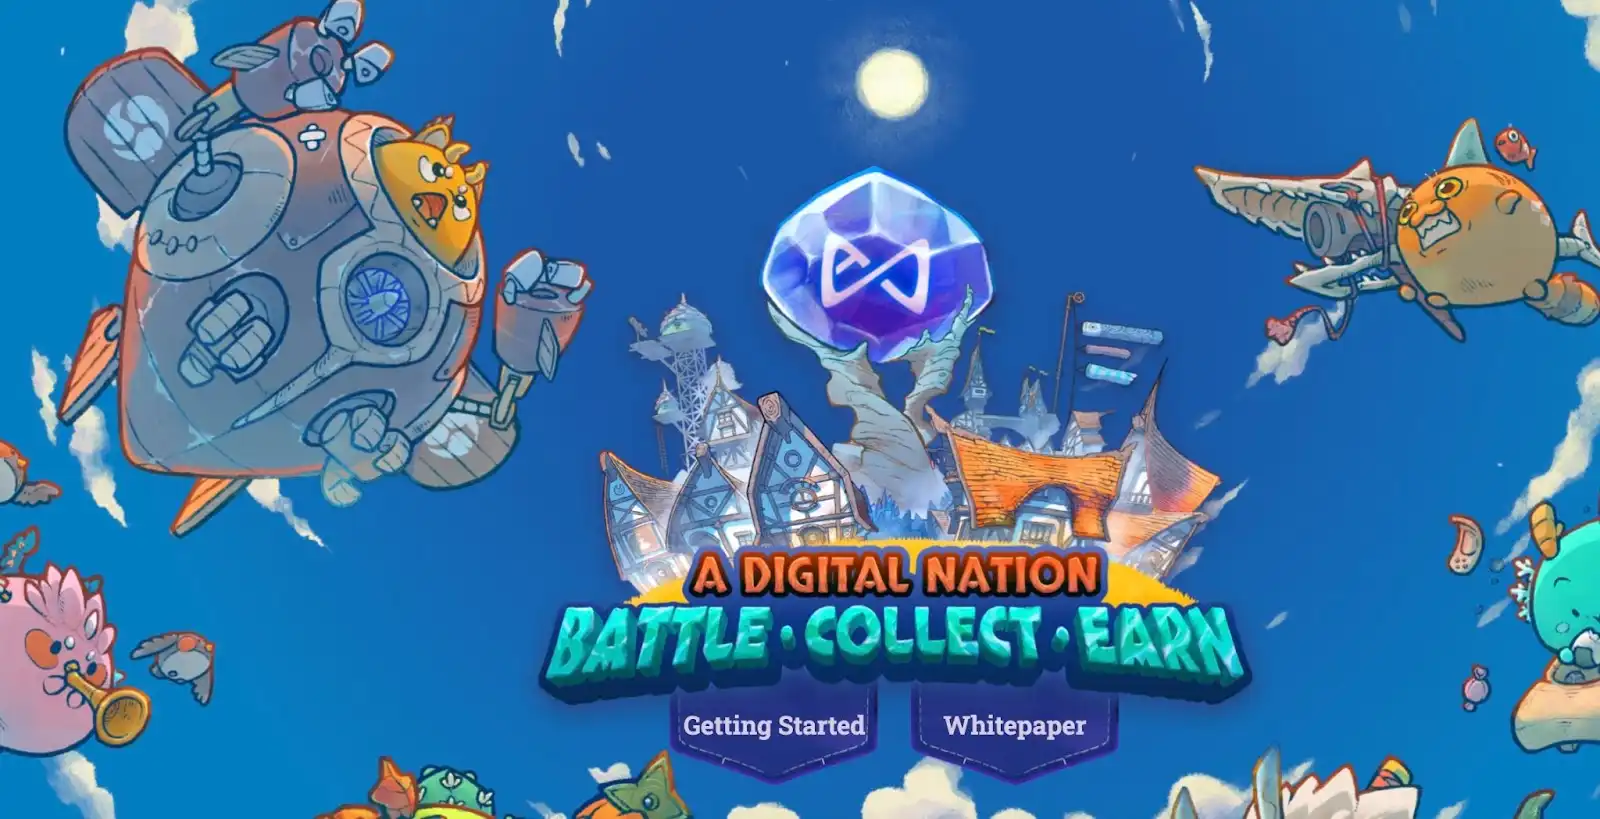 Screenshot of the Axie landing page showing a getting started button and a whitepaper button. The background has a fun-looking illustration of a cloud city with flying creatures surrounding it.